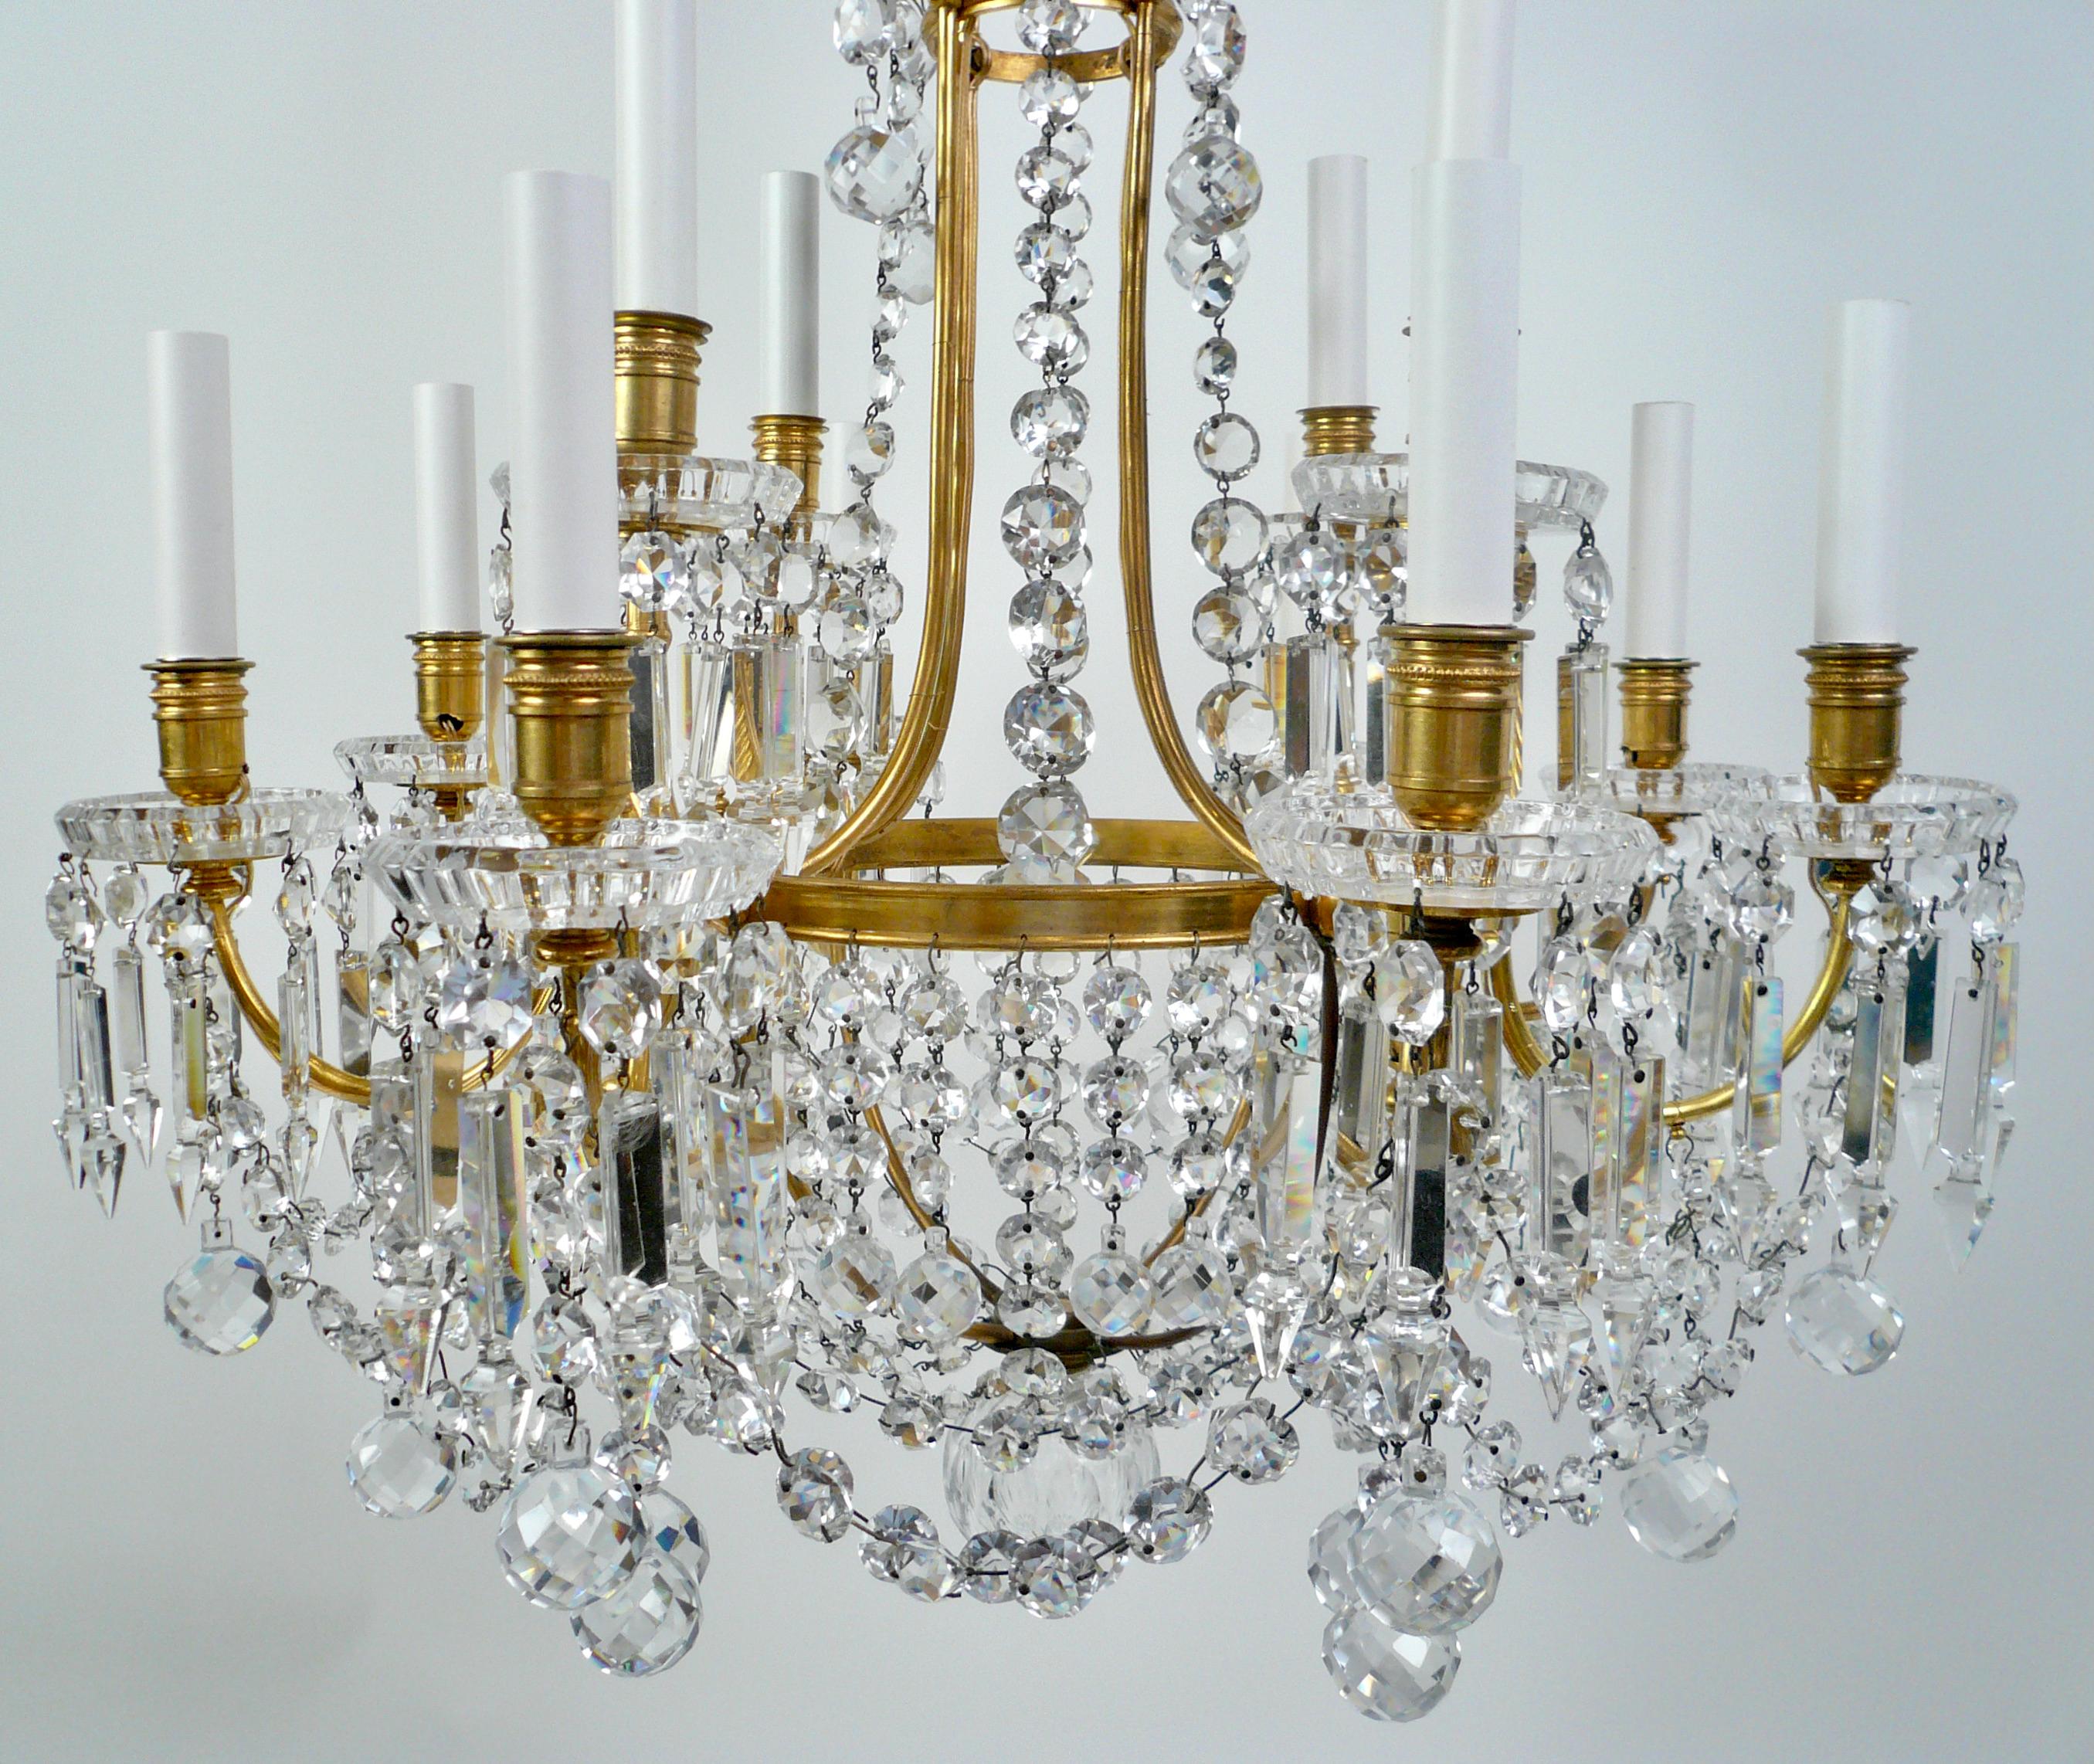 Signed Baccarat Gilt Bronze and Crystal 12 Light Chandelier, circa 1890 For Sale 3